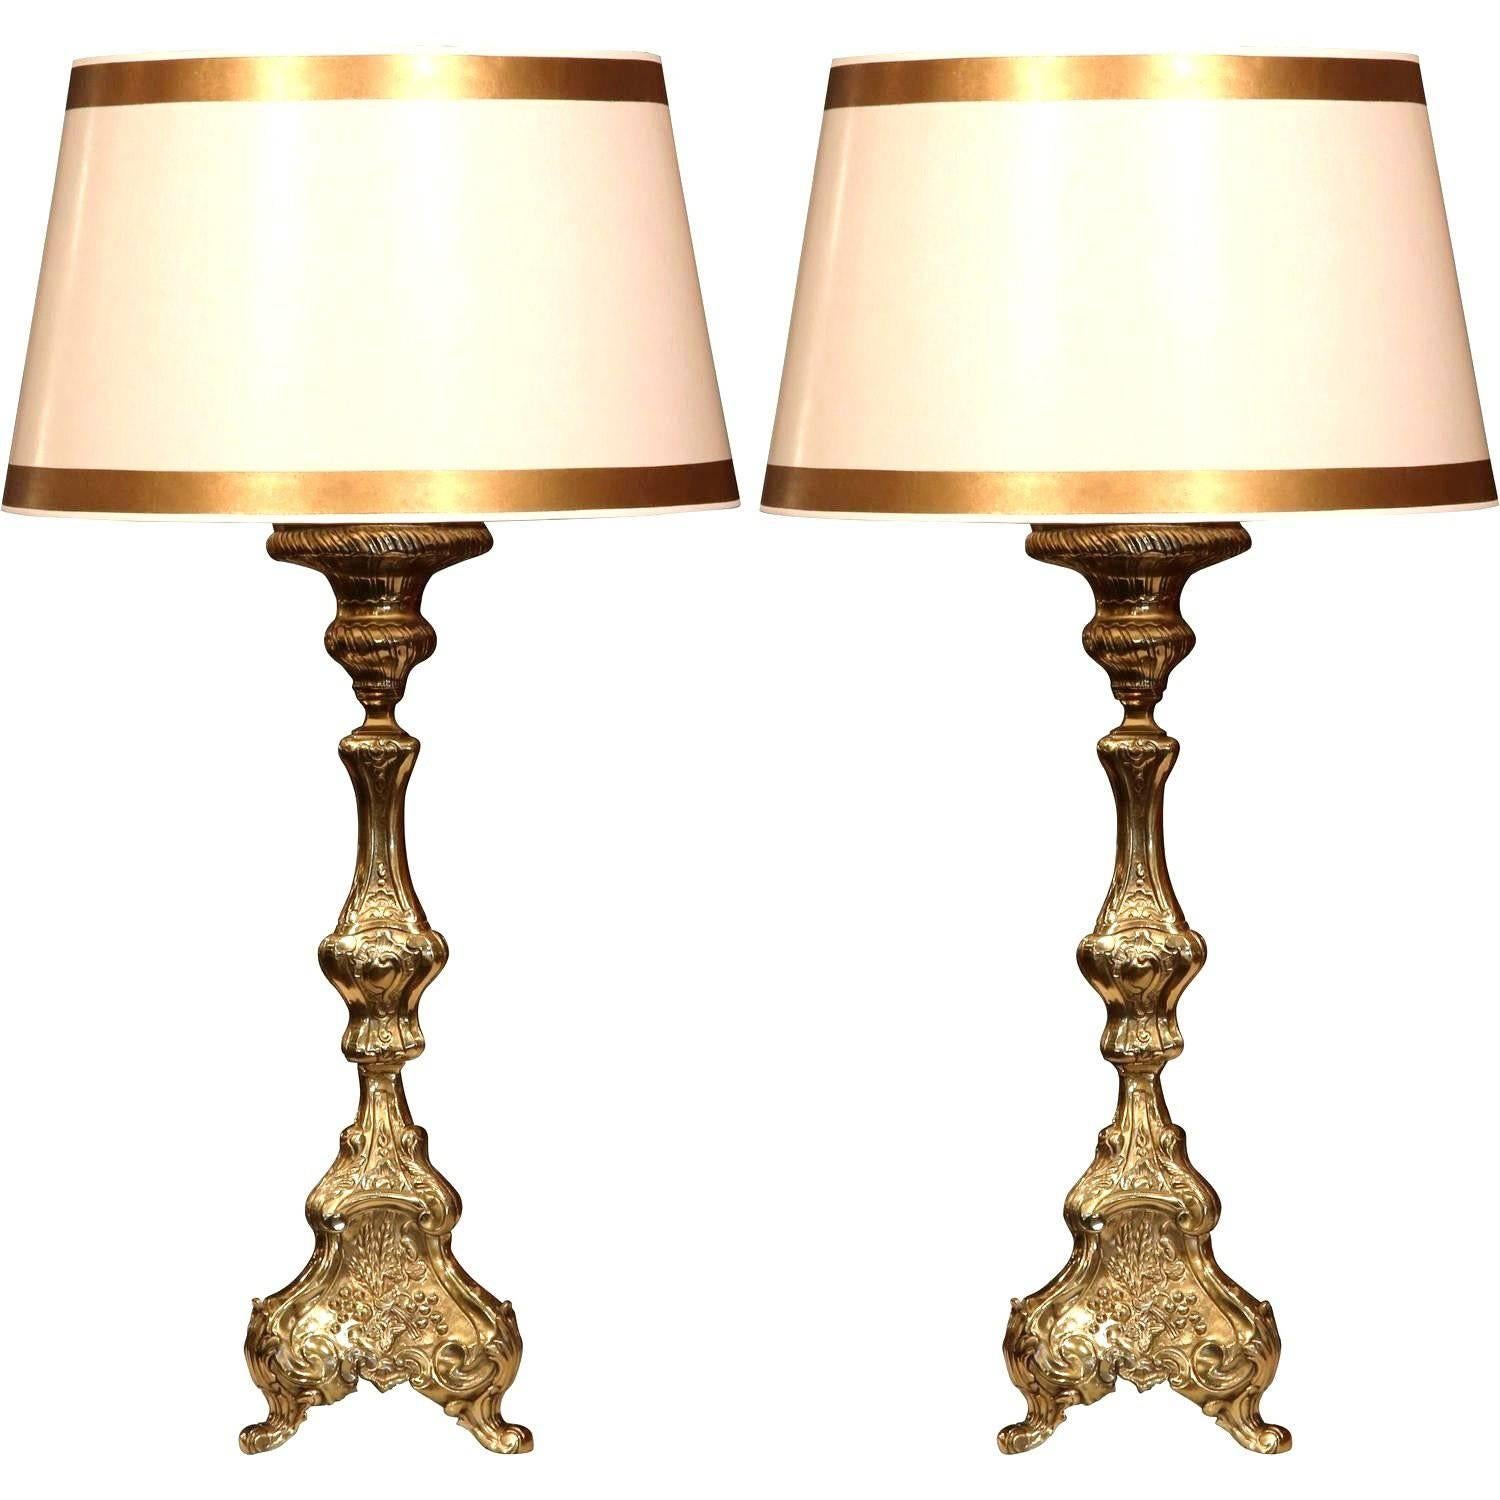 Pair of 19th Century, French Repousse Brass Candlesticks Mounted into Lamp Bases